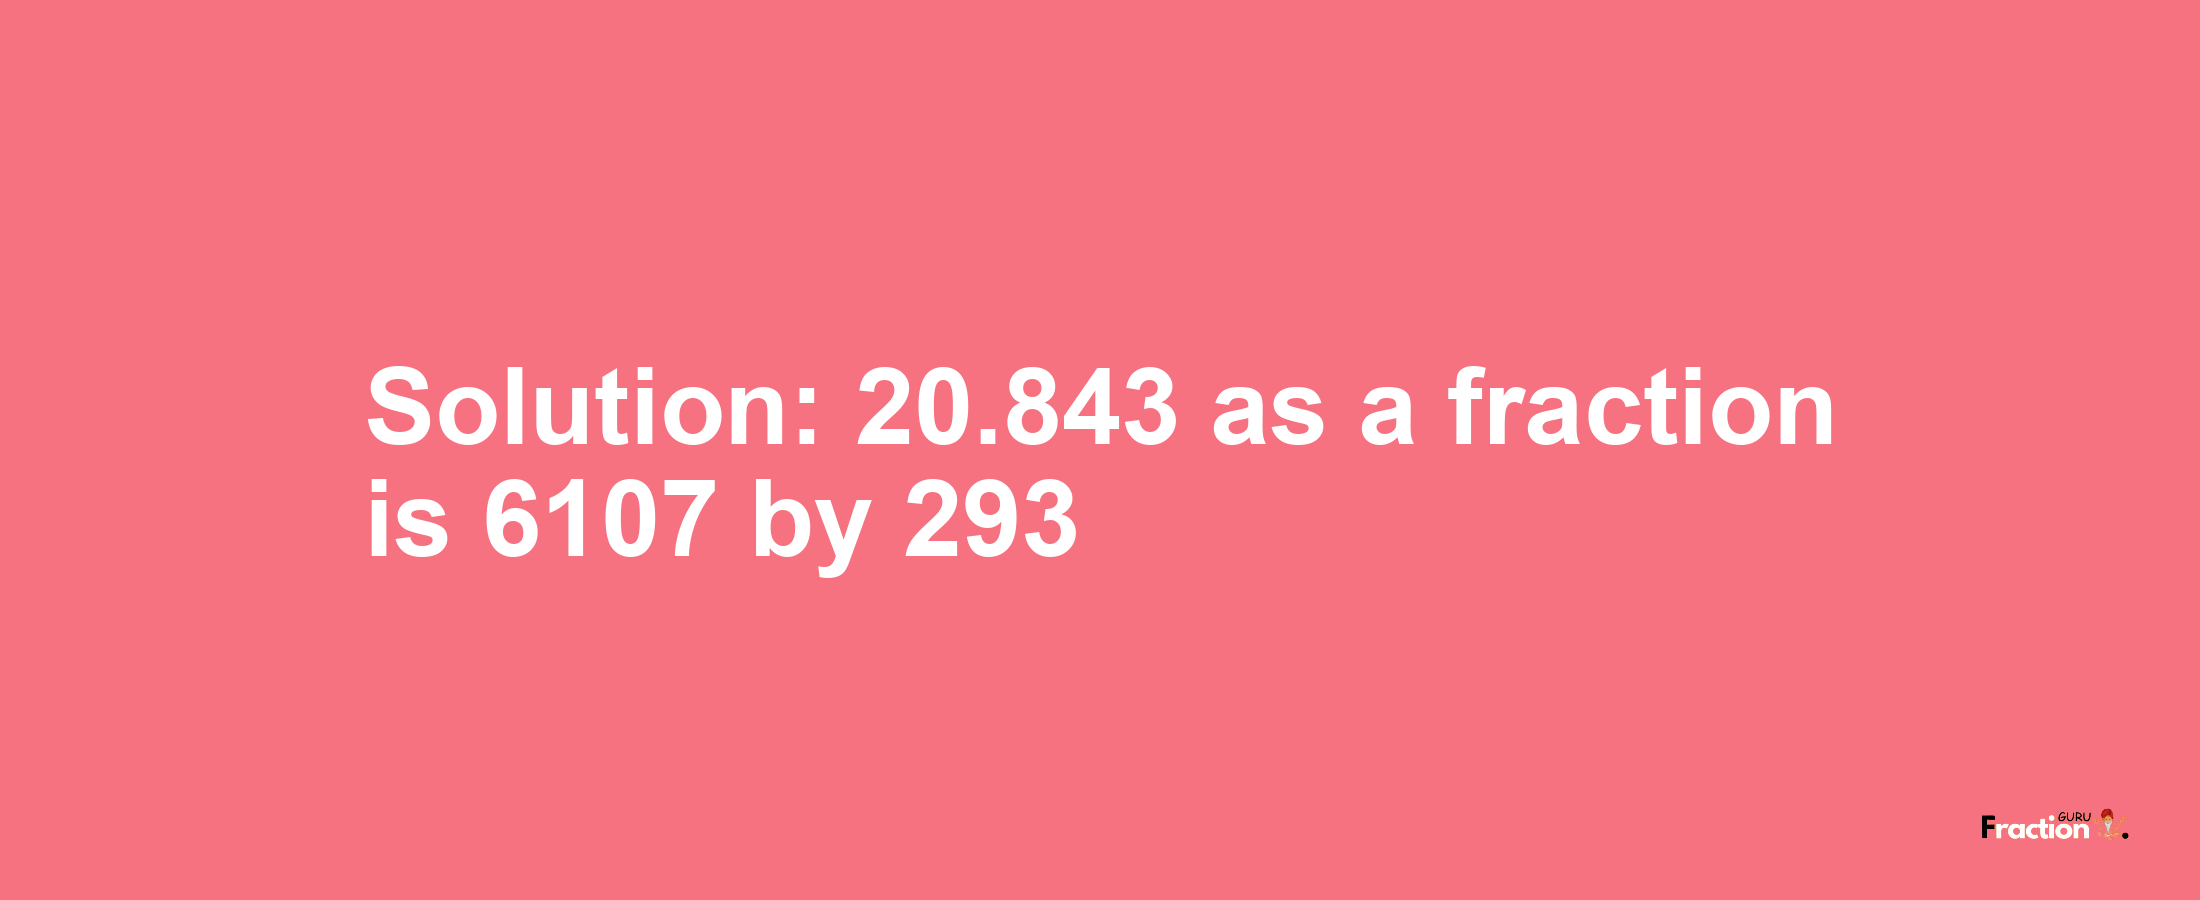 Solution:20.843 as a fraction is 6107/293